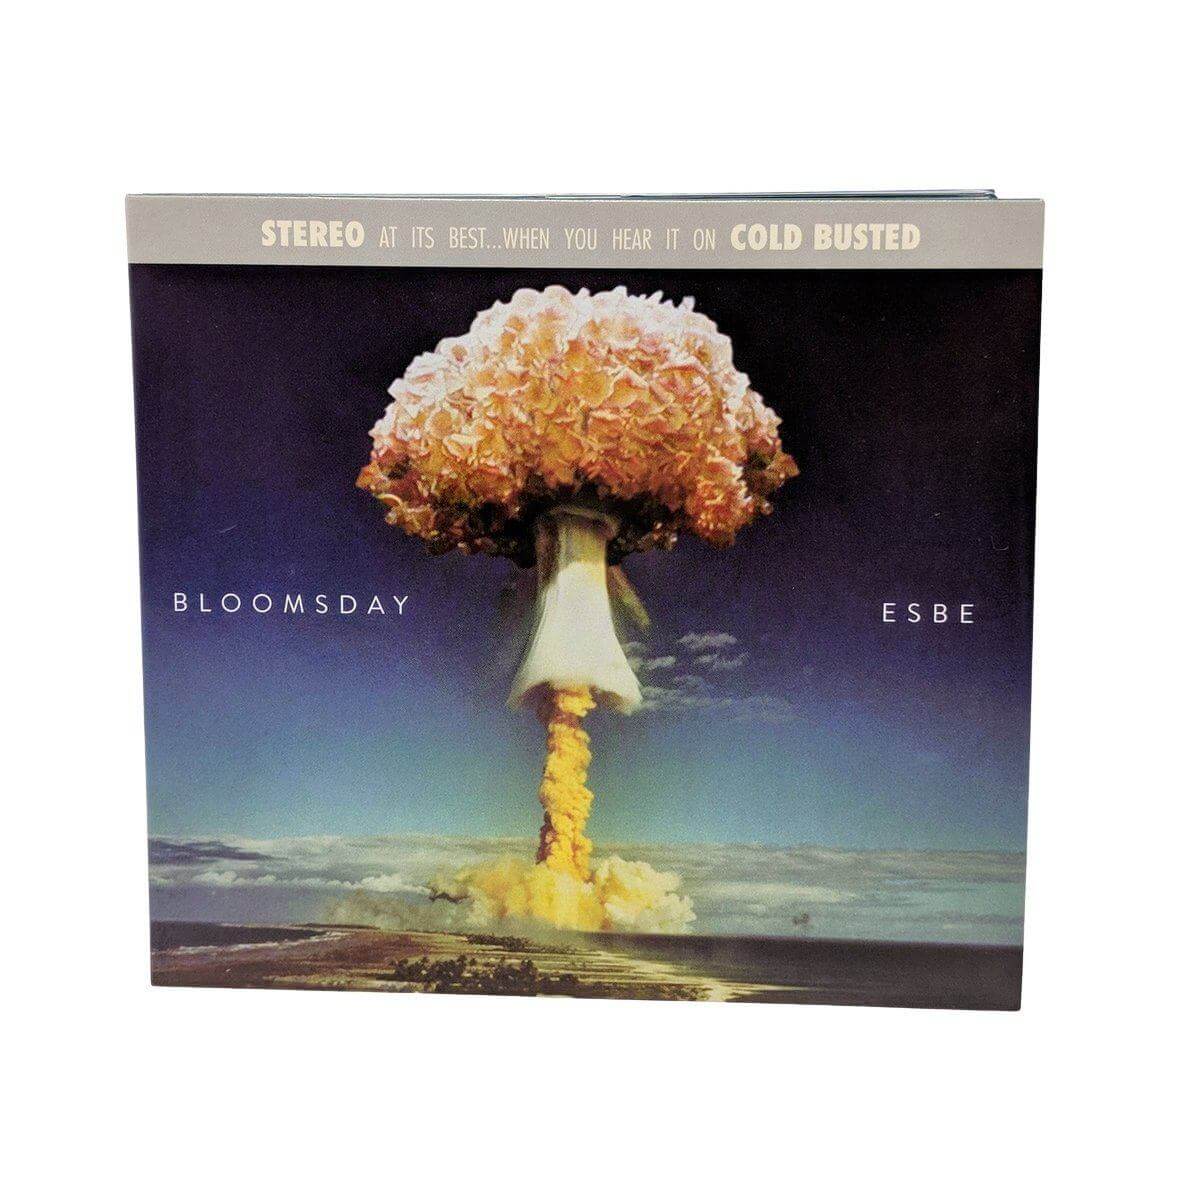 Esbe - Bloomsday (Remastered) - Limited Edition Compact Disc - Cold Busted